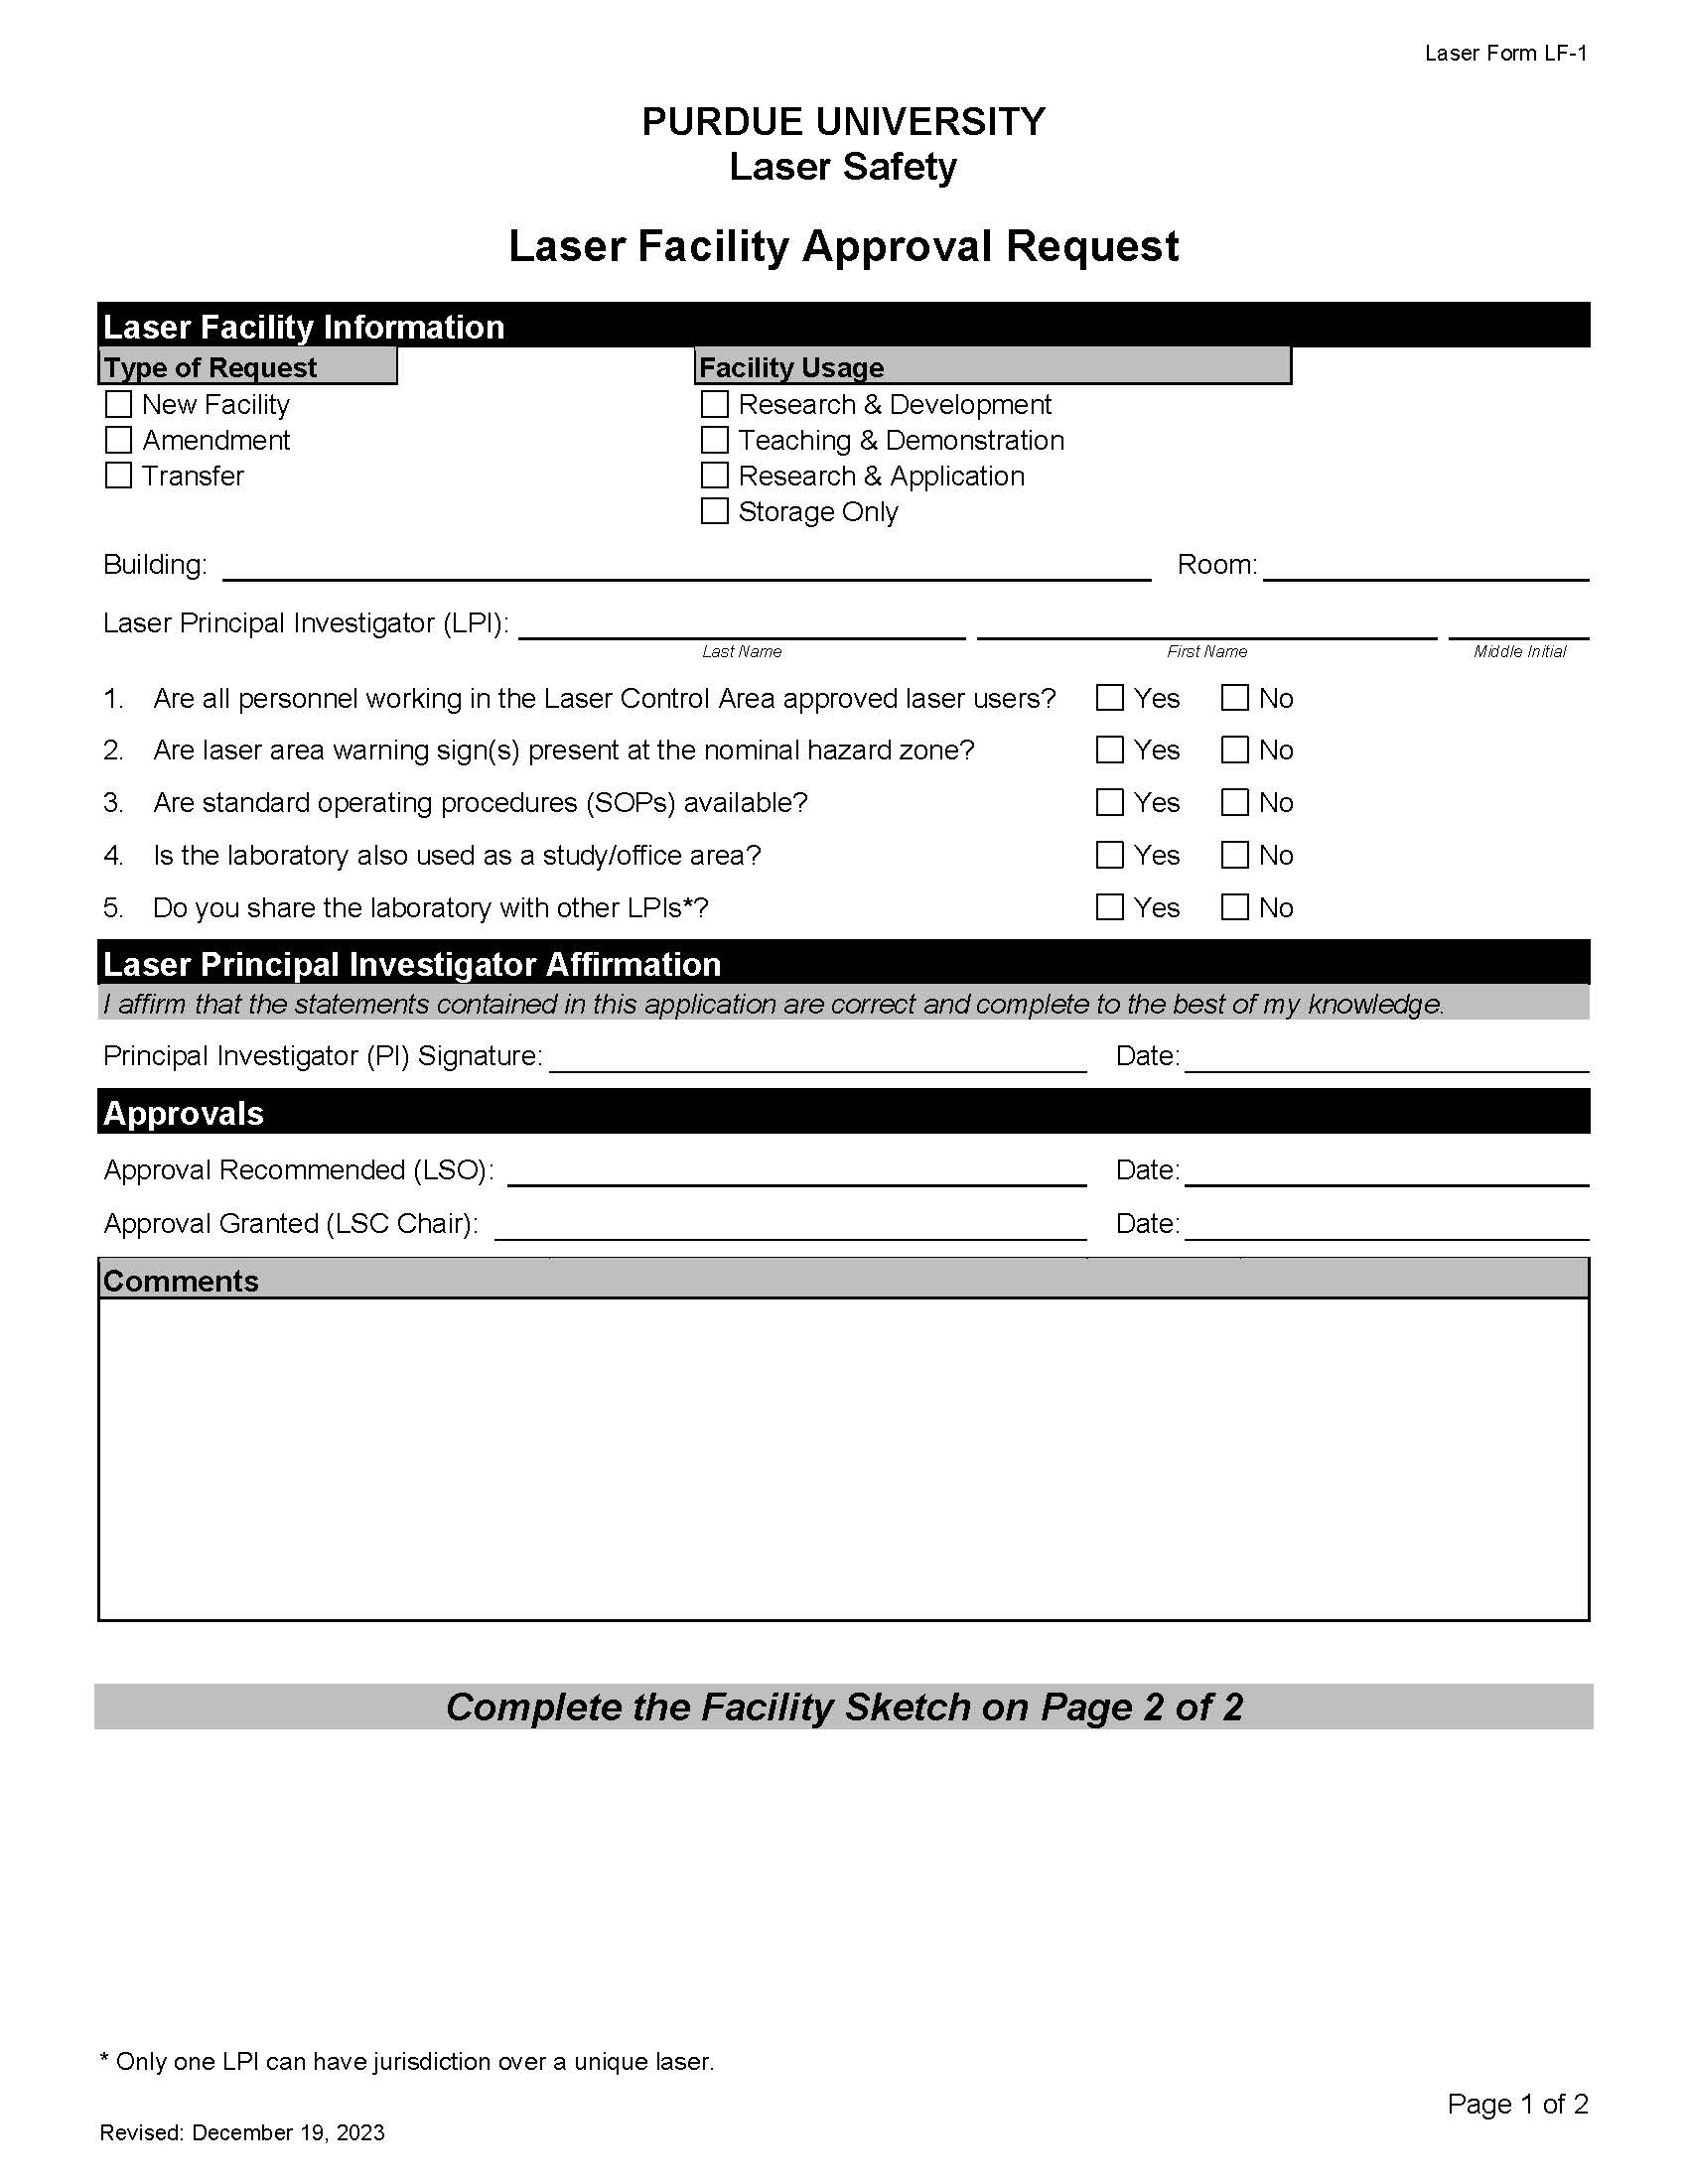 laser facility approval request form